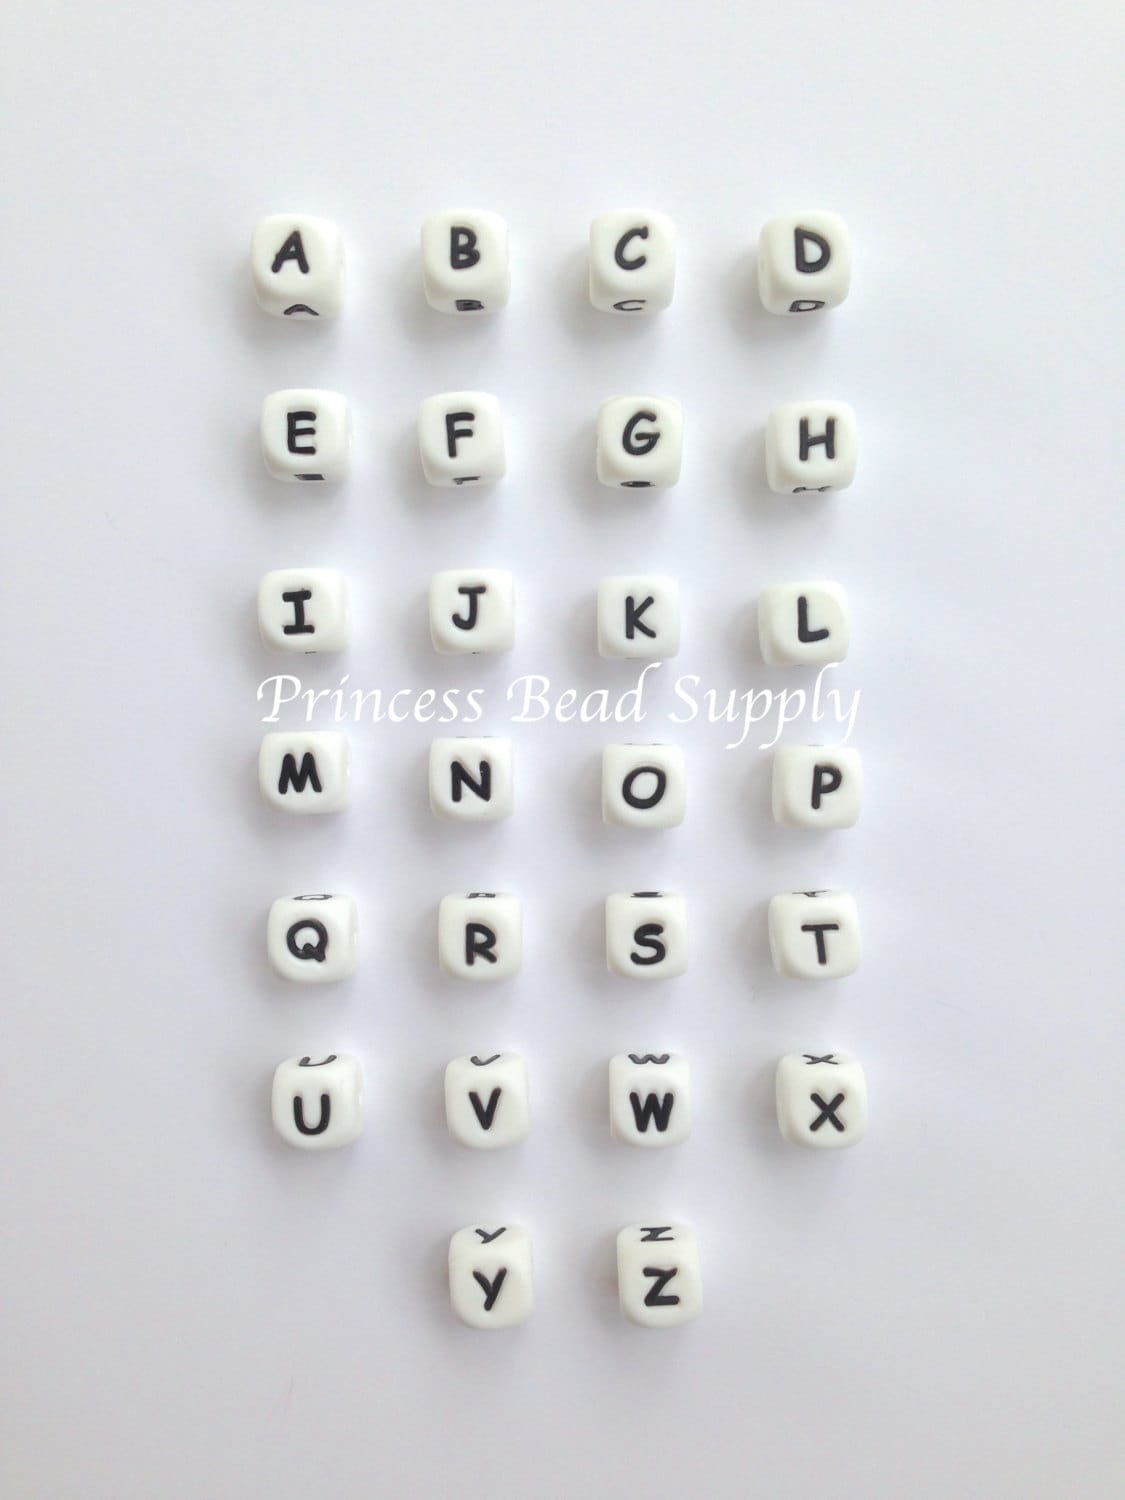 Free Shipping 10*10MM Square Acrylic Letter Beads Single Alphabet A  Printing White Cube Jewelry Name Bracelet Beads 550pcs - AliExpress